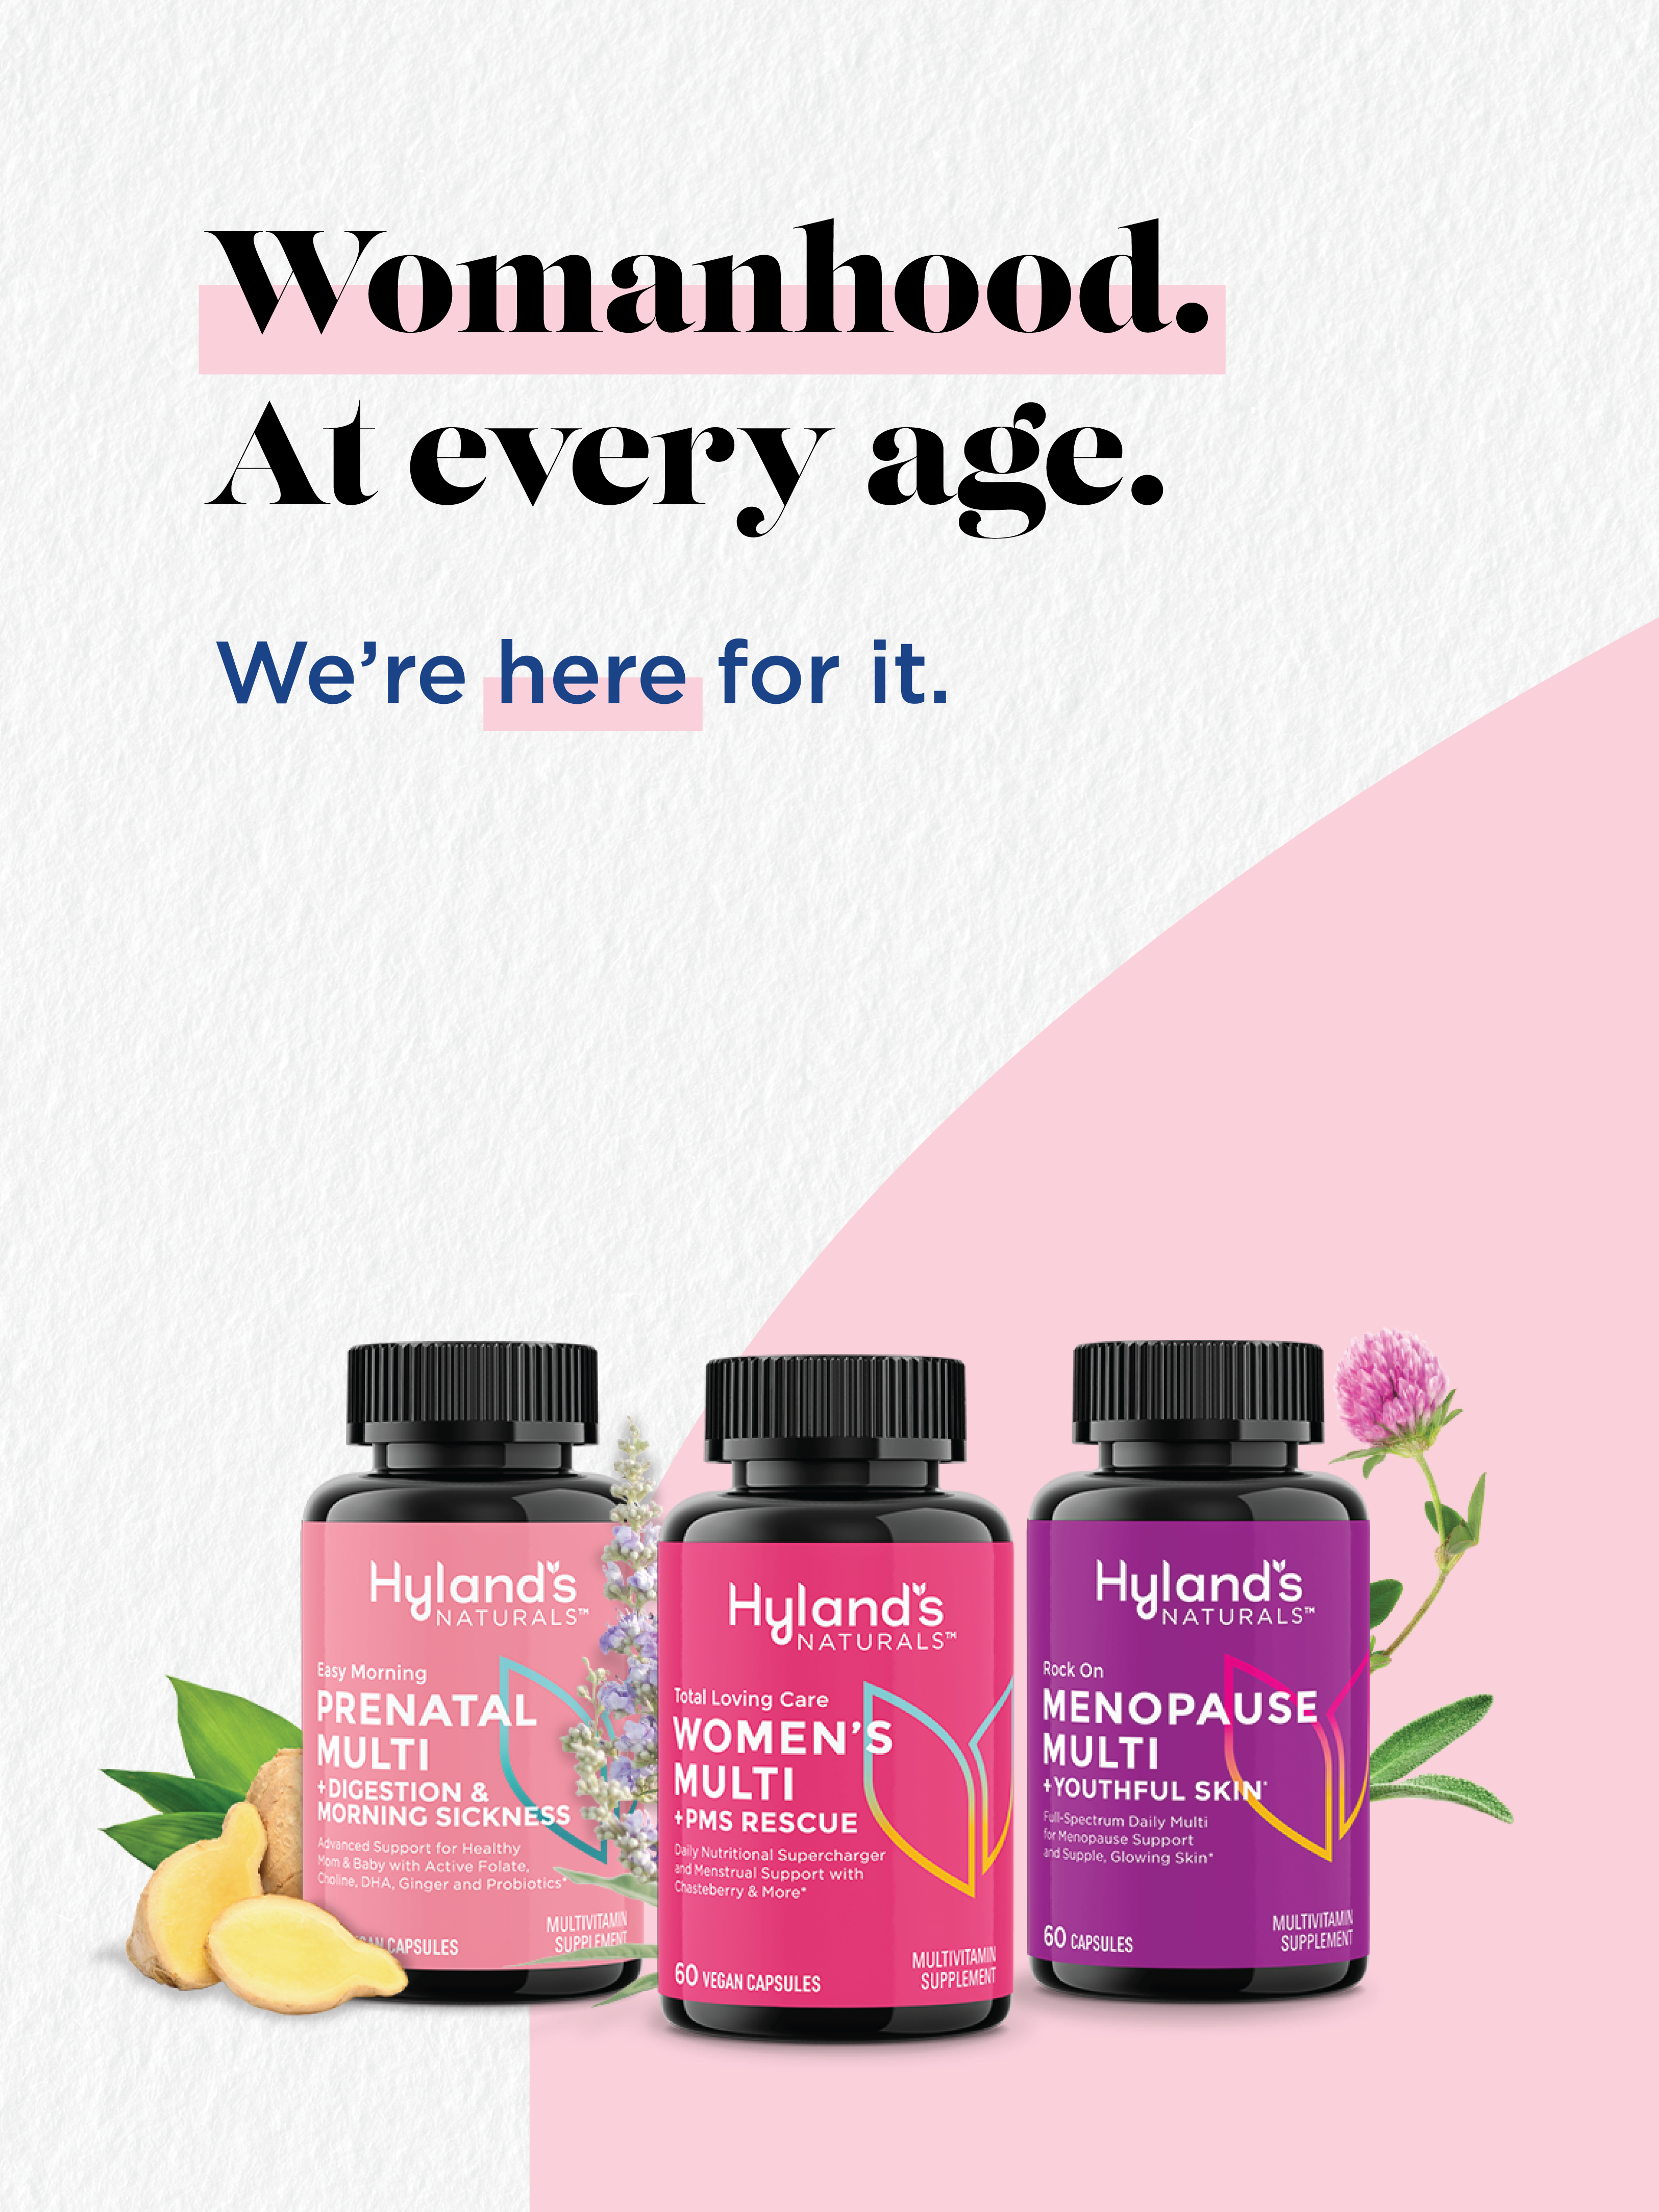 Womanhood at Every Age. We're Here for it. Try our 3 Womens Multi Vitamins.